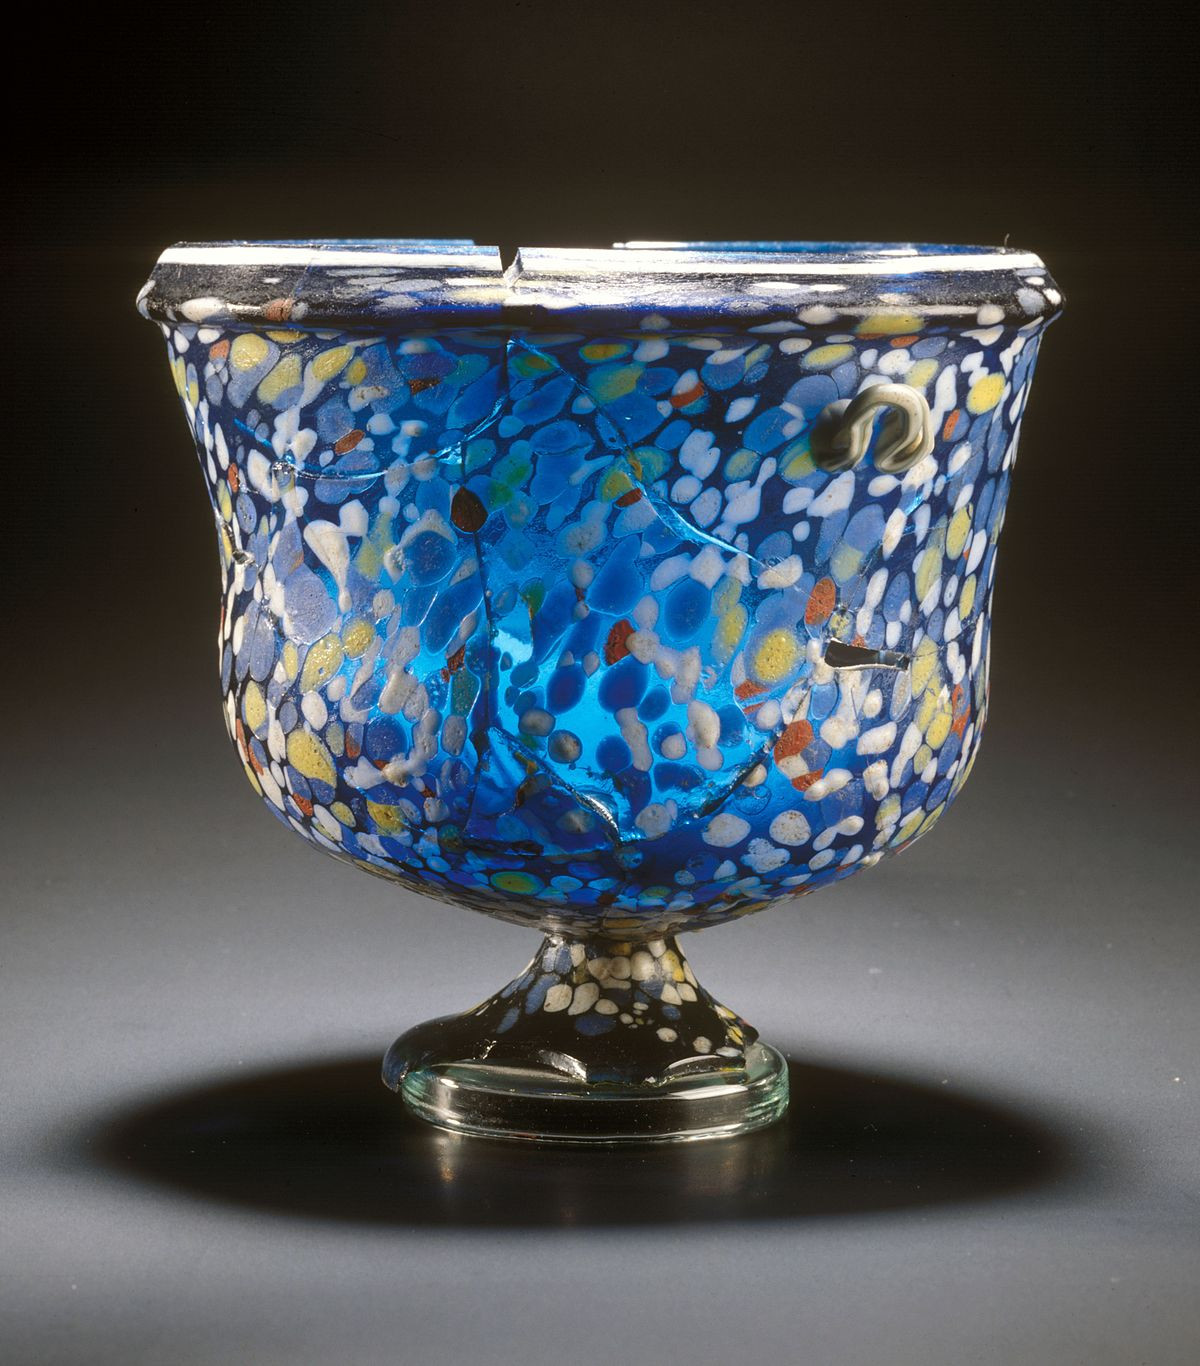 20 Perfect norleans Vase Made In Italy 2024 free download norleans vase made in italy of glass art wikipedia with regard to 1200px emona trgovina in obrt 1a